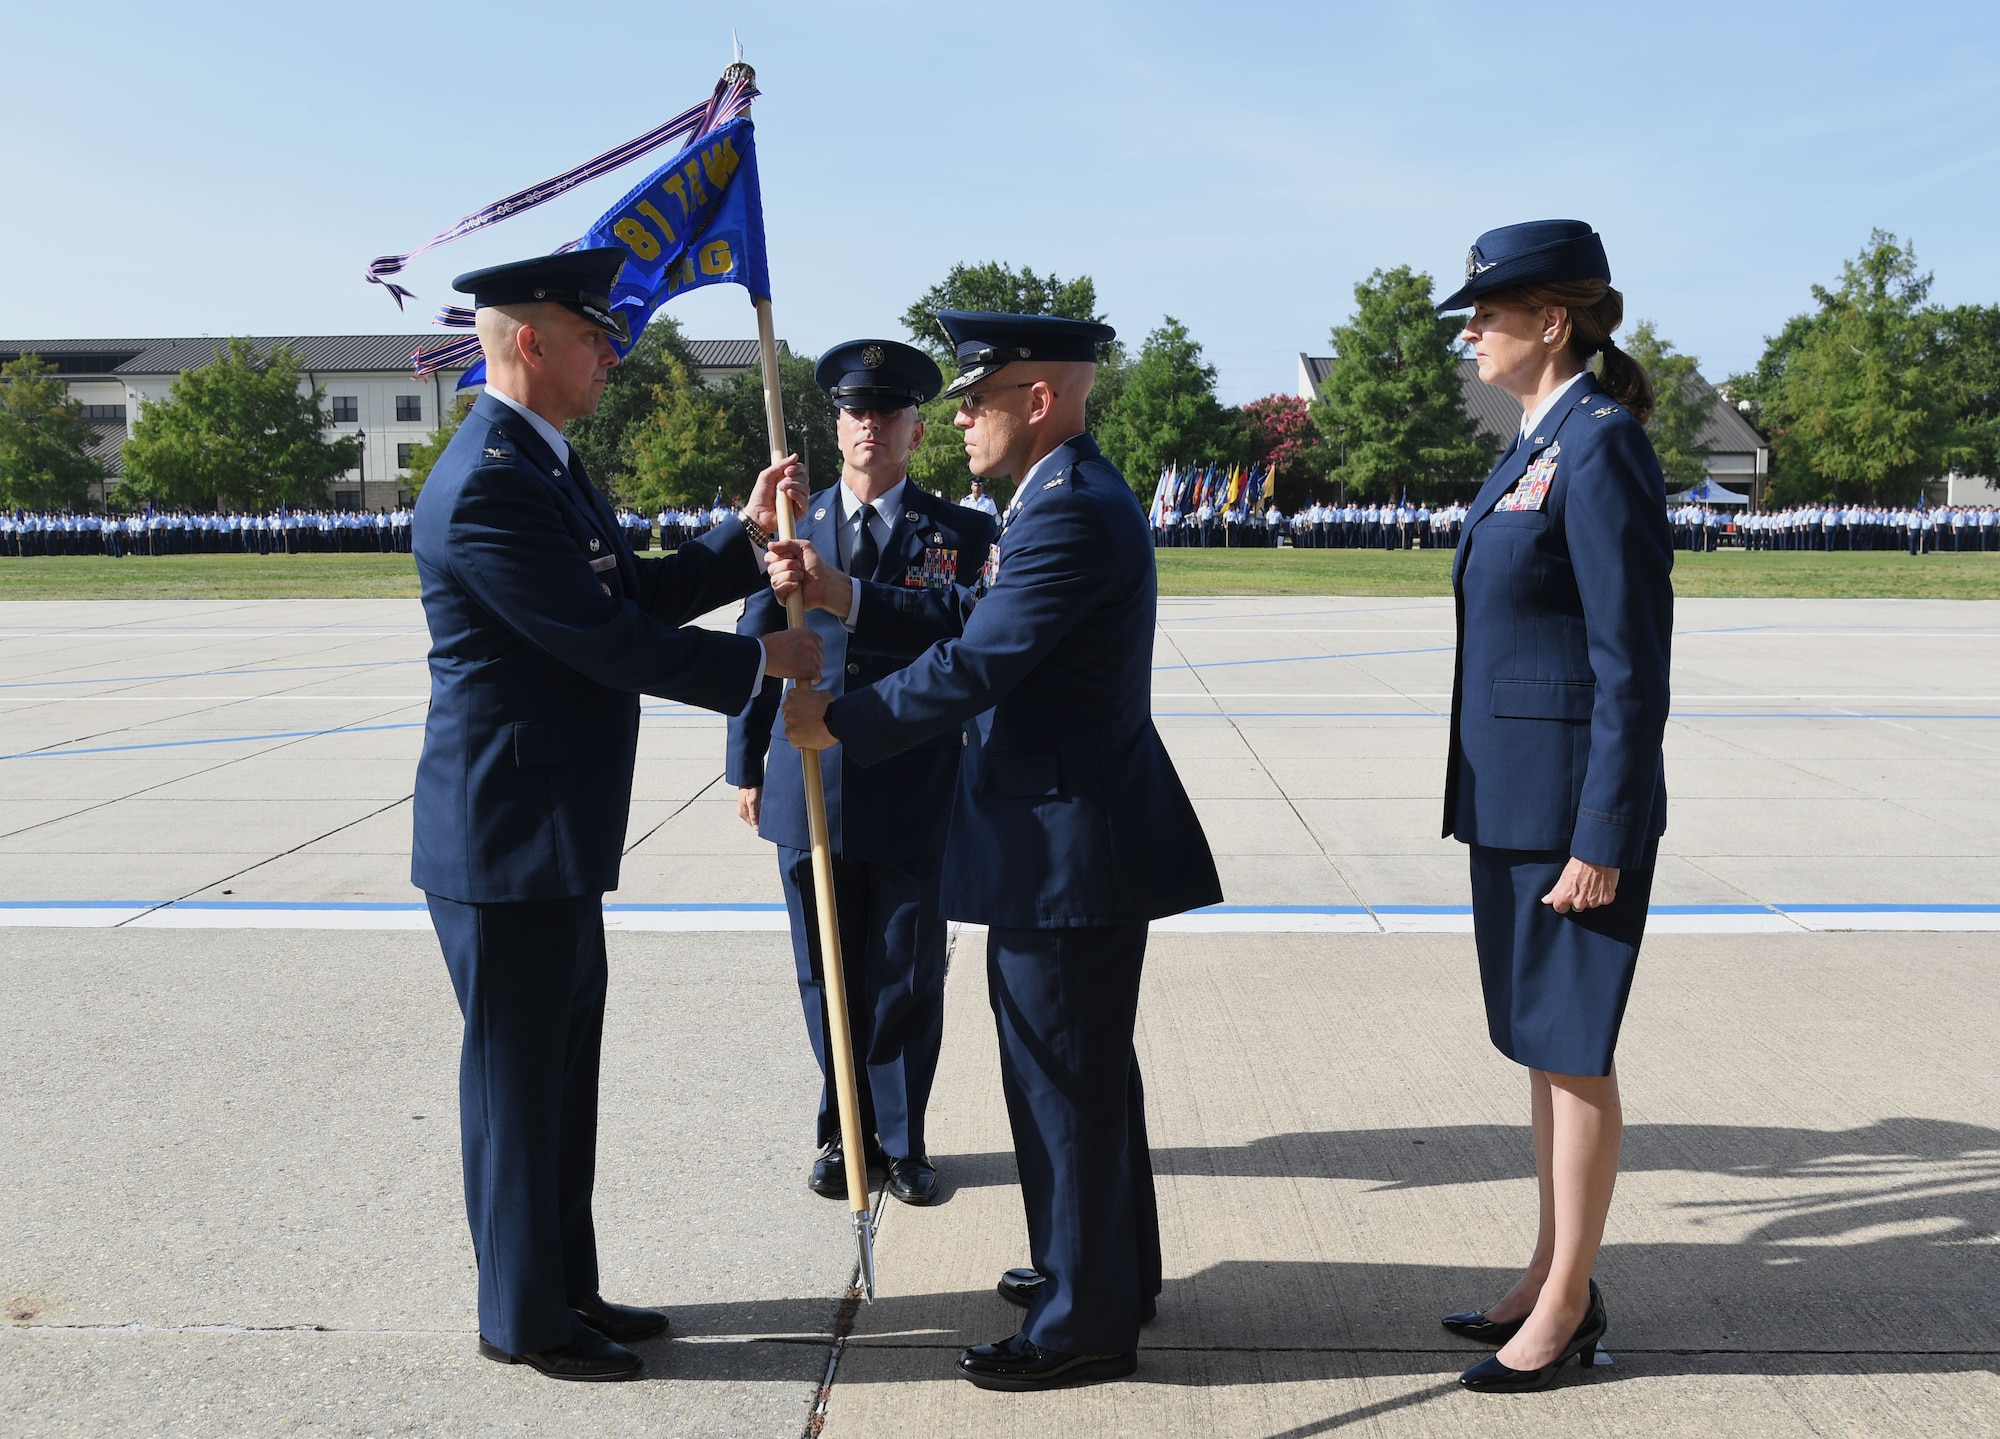 U.S. Air Force Col. William Hunter, 81st Training Wing commander, takes the guidon from Col. Chance Geray, outgoing 81st Training Group commander, as Col. Laura King, incoming 81st TRG commander, stands by during the 81st TRG Change of Command Ceremony on the Levitow Training Support Facility drill pad at Keesler Air Force Base, Mississippi, June 15, 2022. The ceremony is a symbol of command being exchanged from one commander to the next. (U.S. Air Force photo by Kemberly Groue)